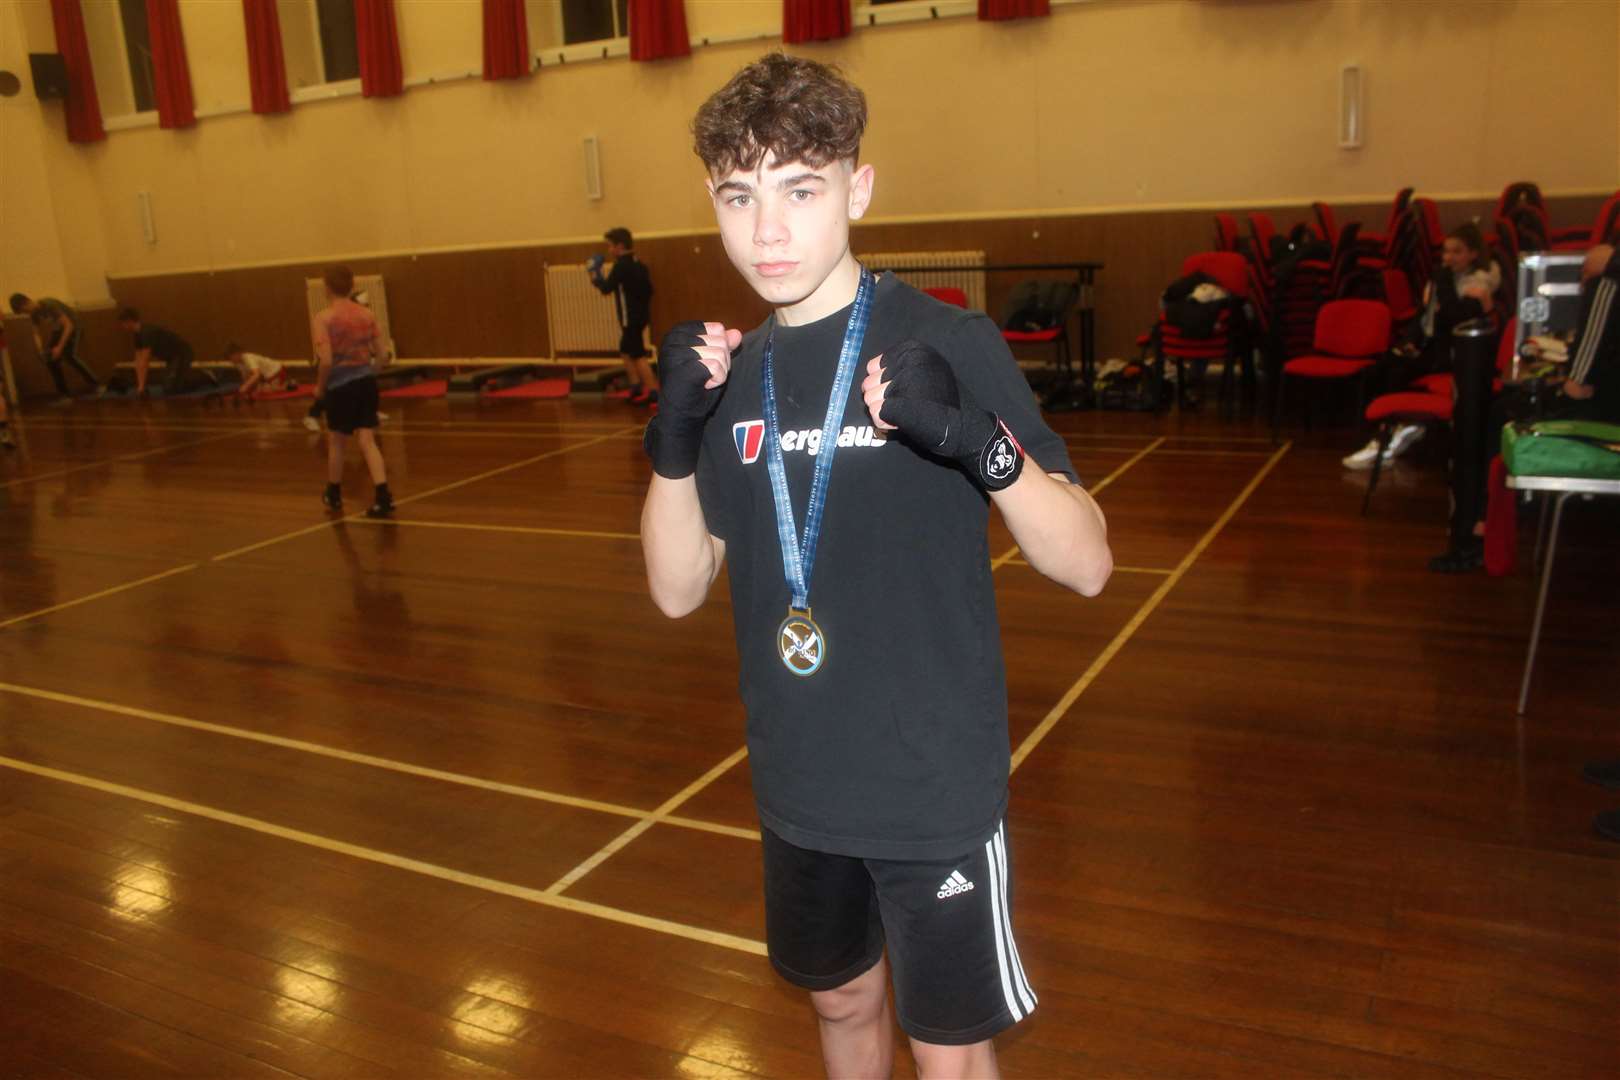 Boxer Nathaniel Cook proudly wearing his gold medal from the Intermediate Championships.